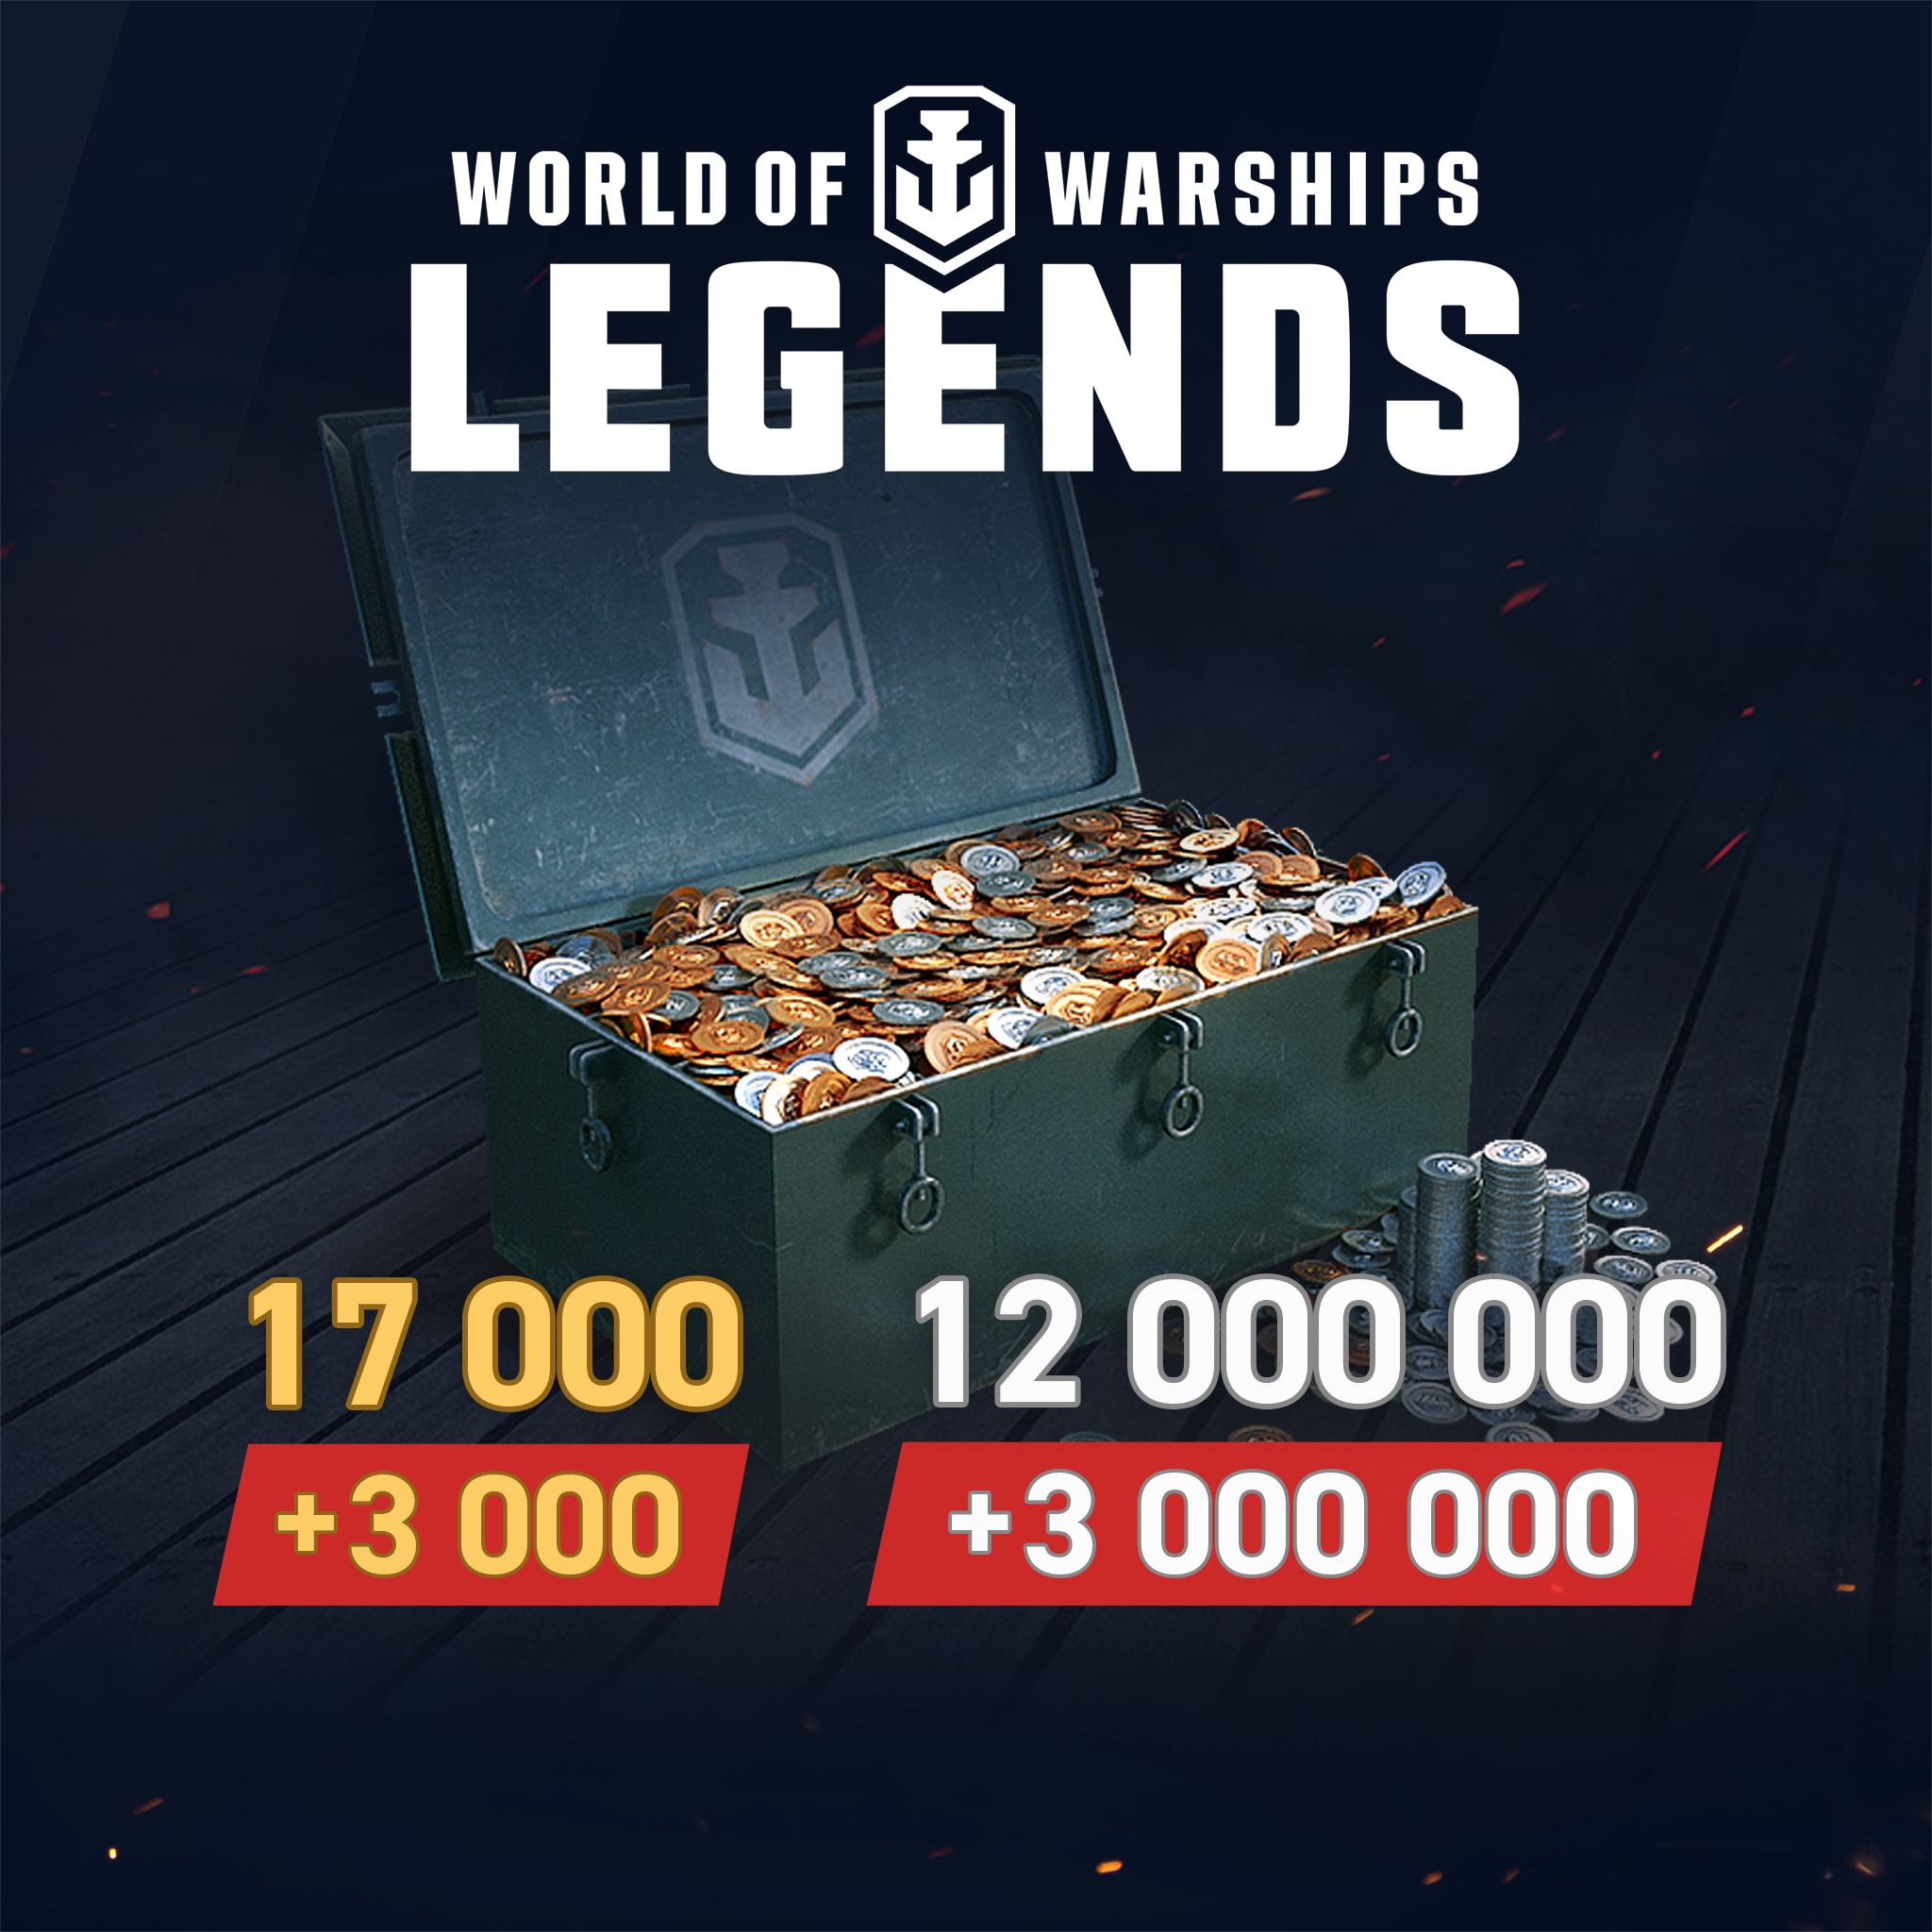 World of Warships: Legends - Warchest PS4